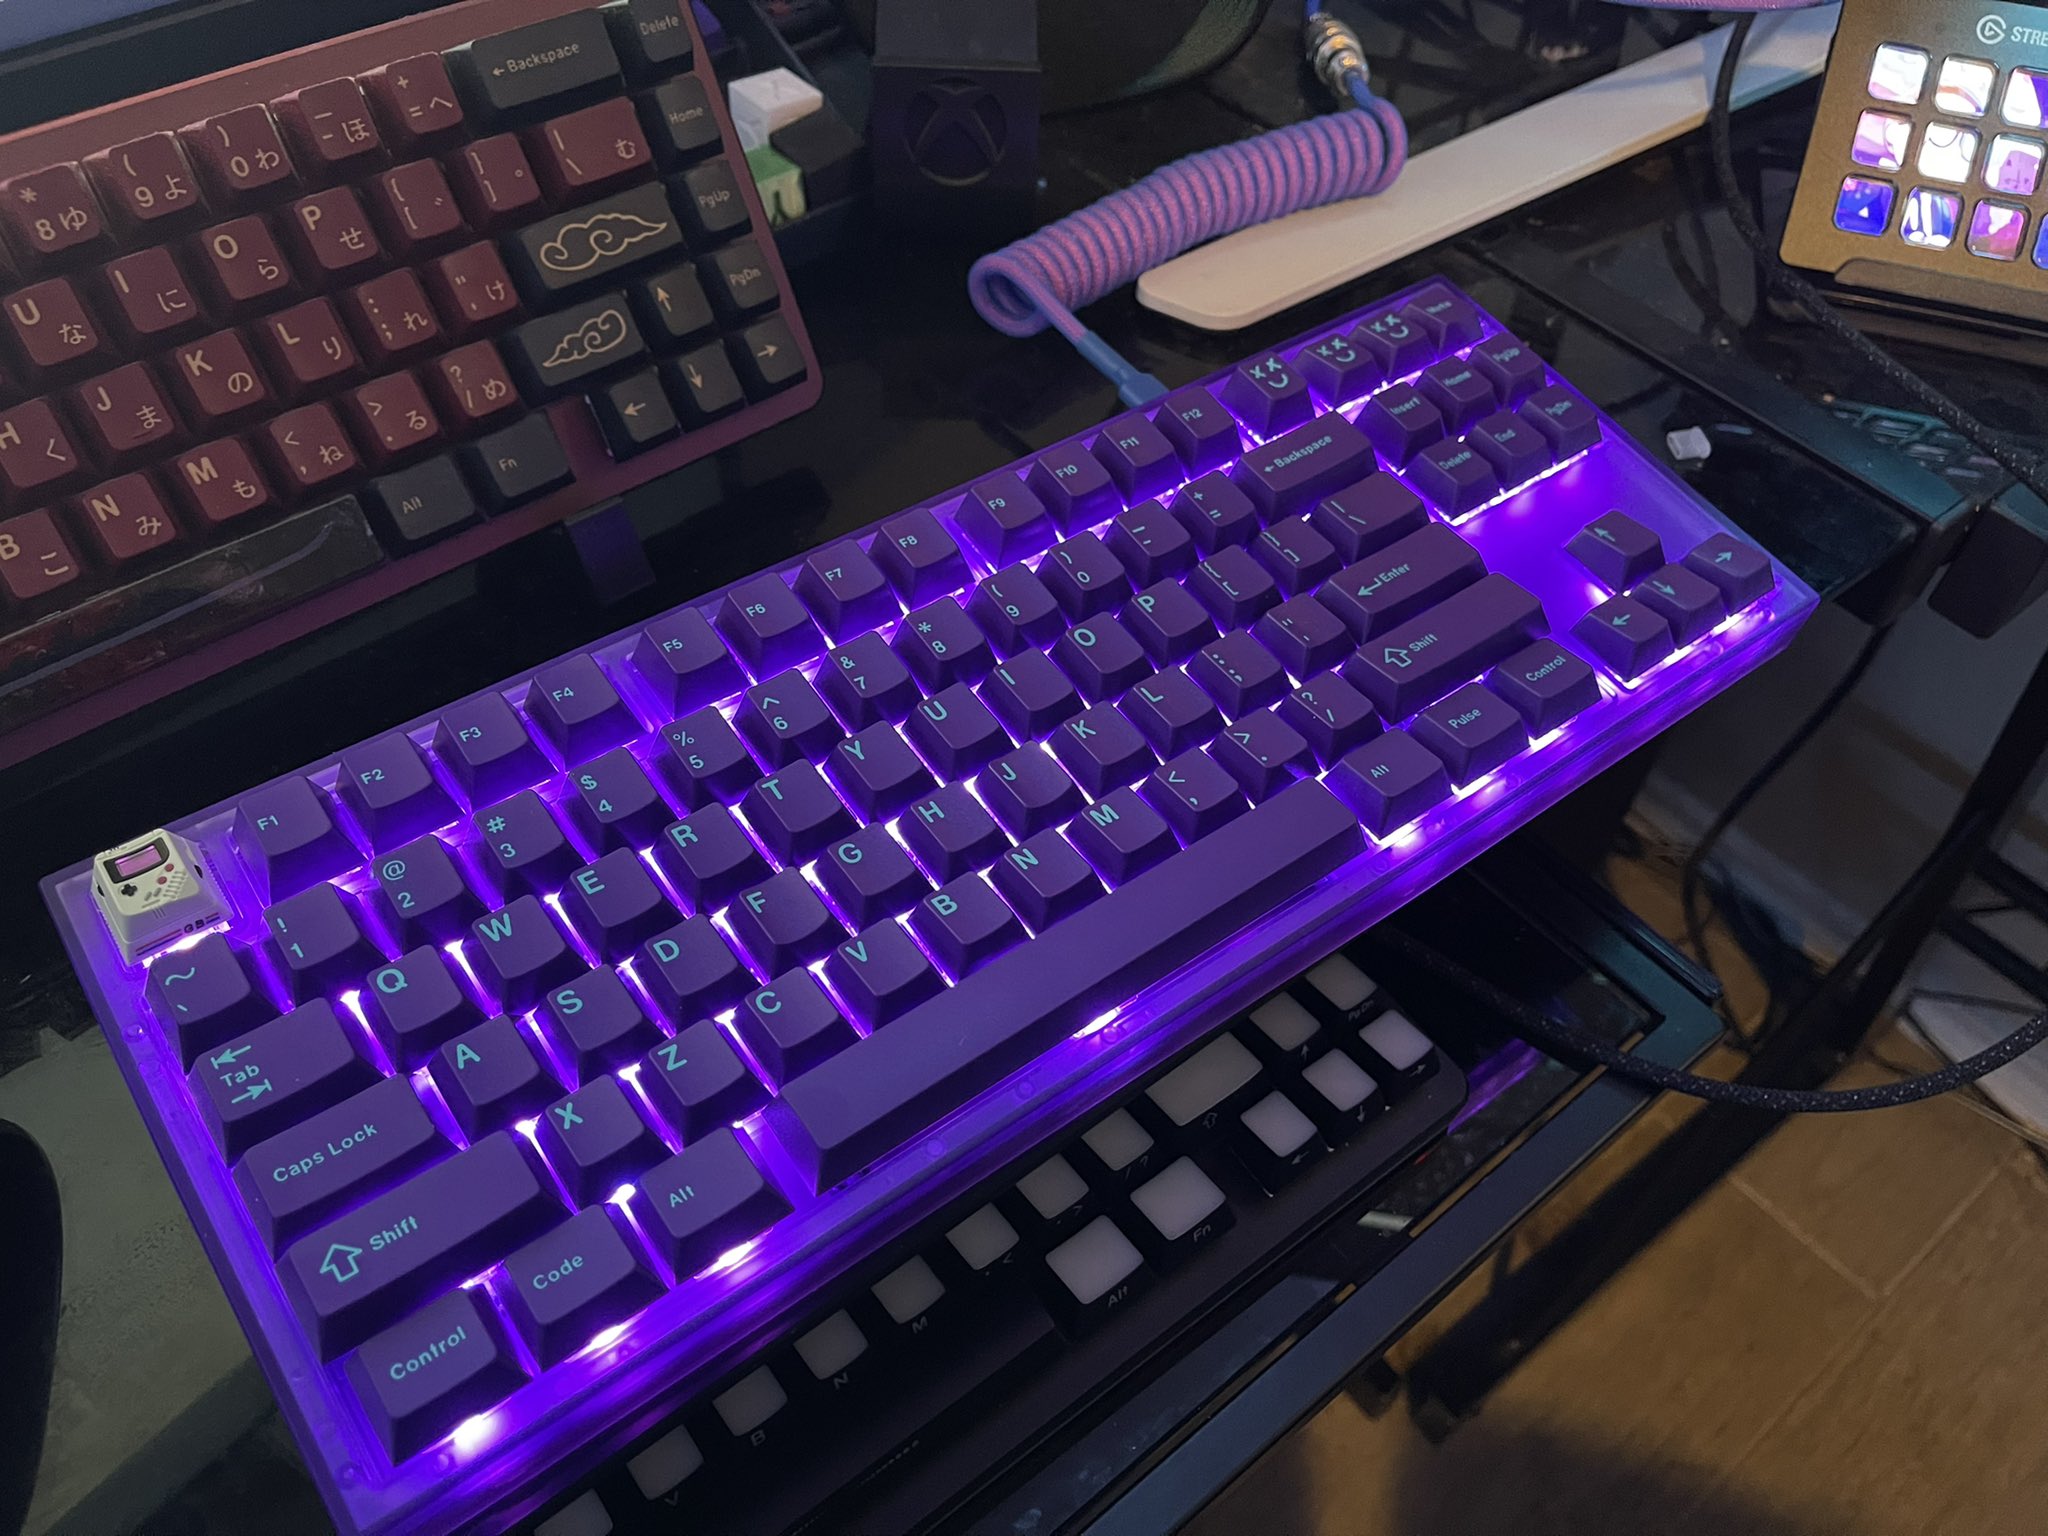 pyrowillie on X: I am really happy with how this keyboard build